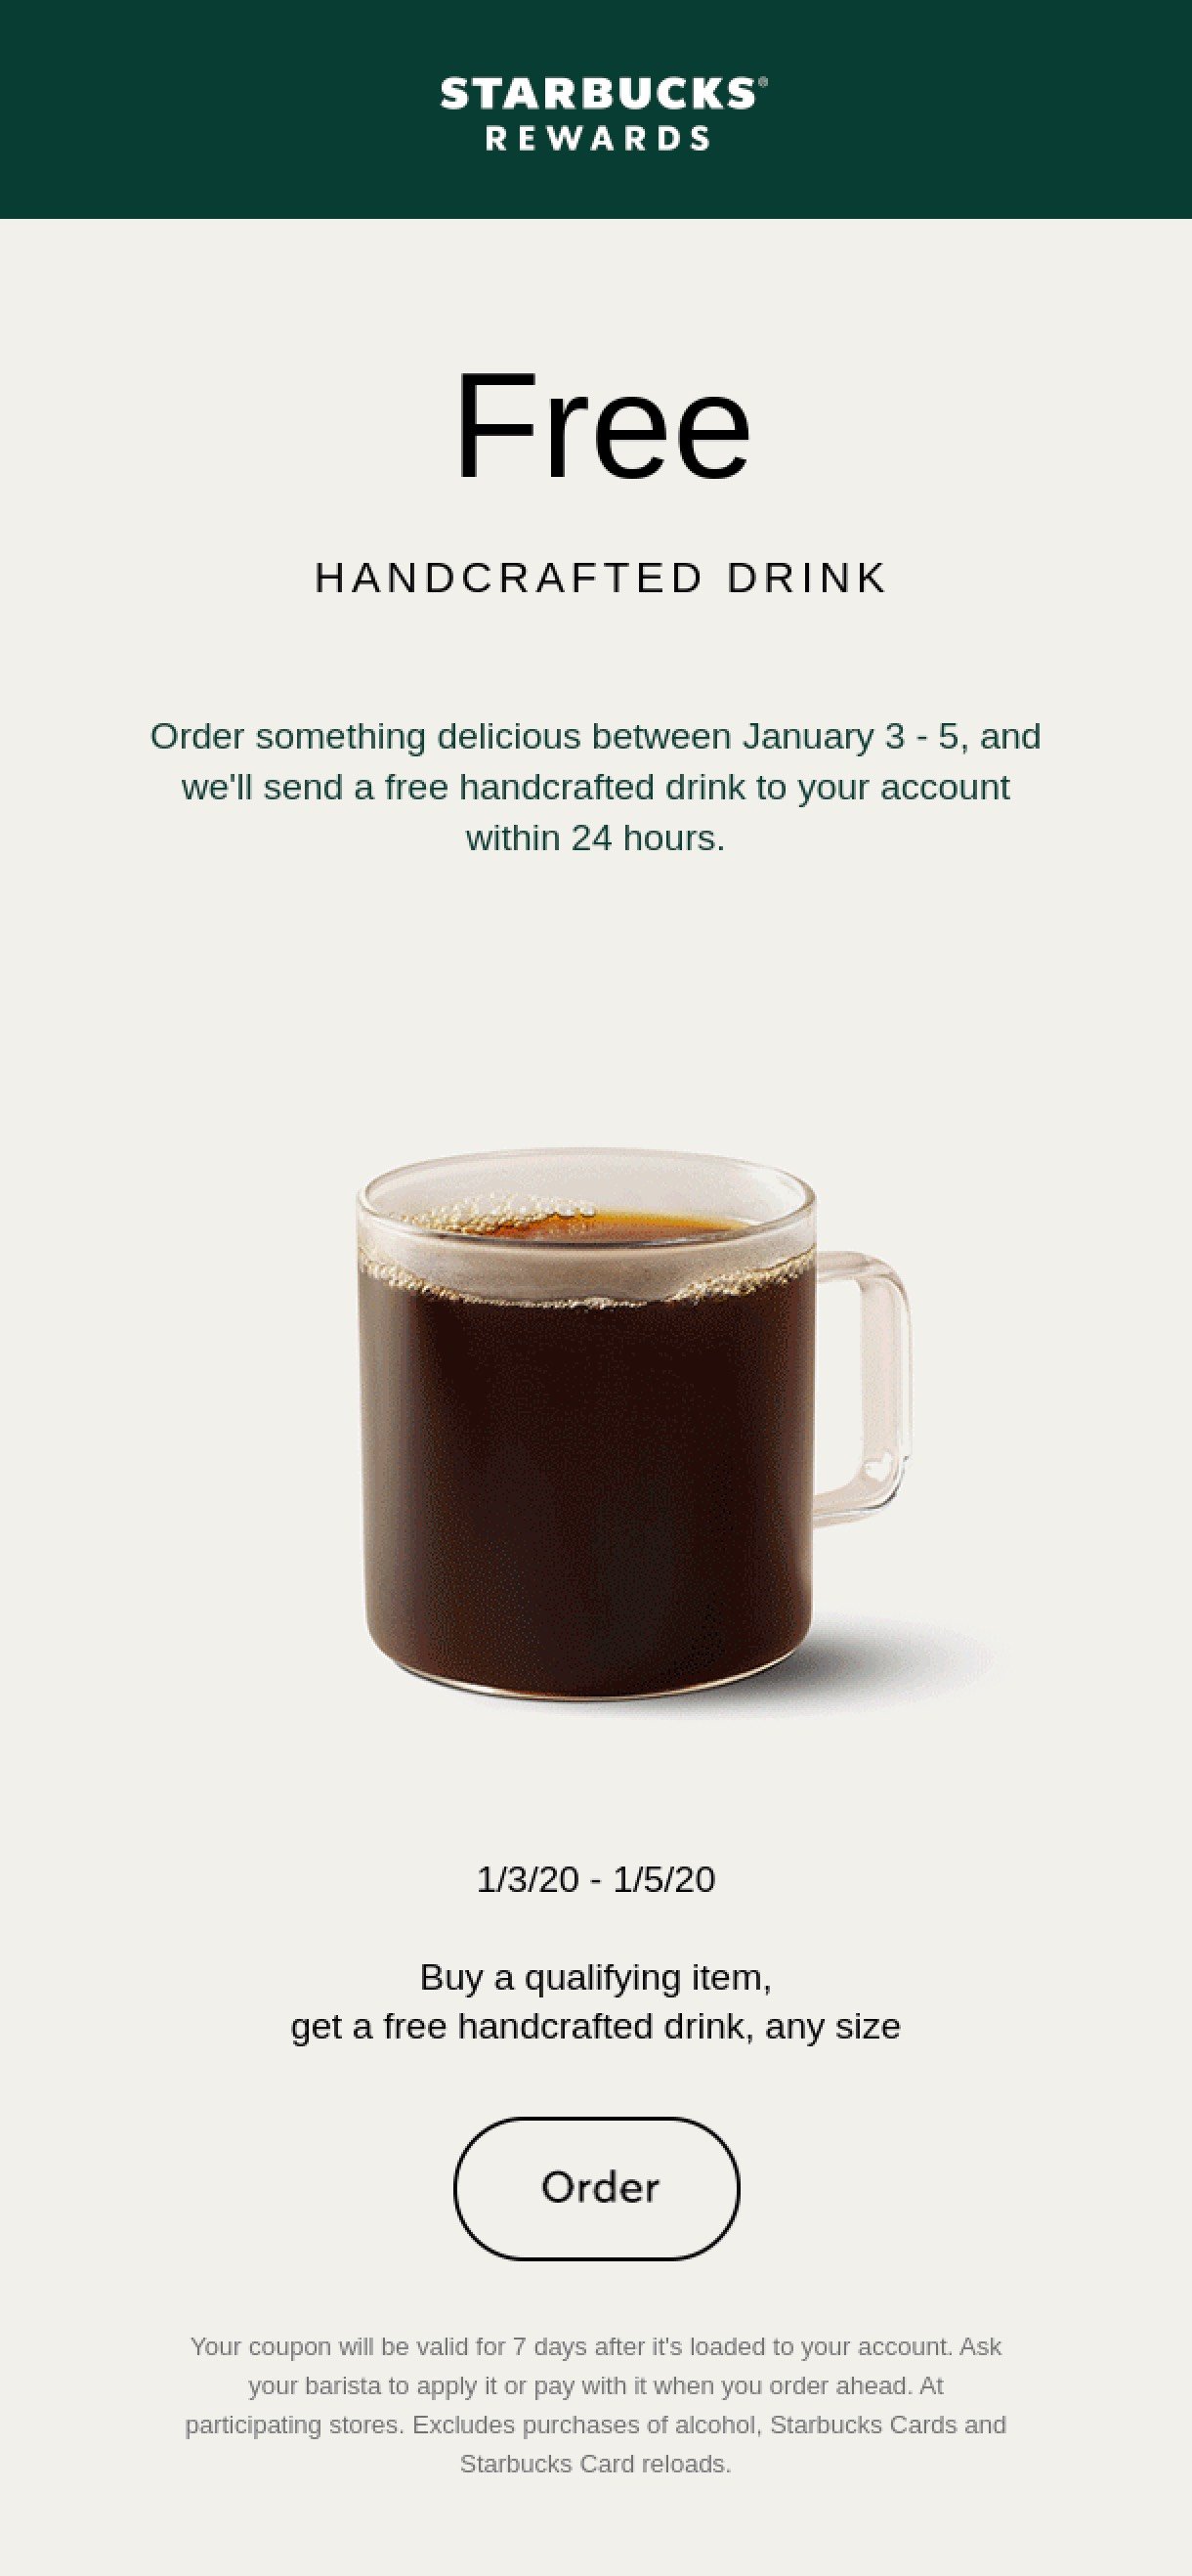 Email coupon by Starbucks